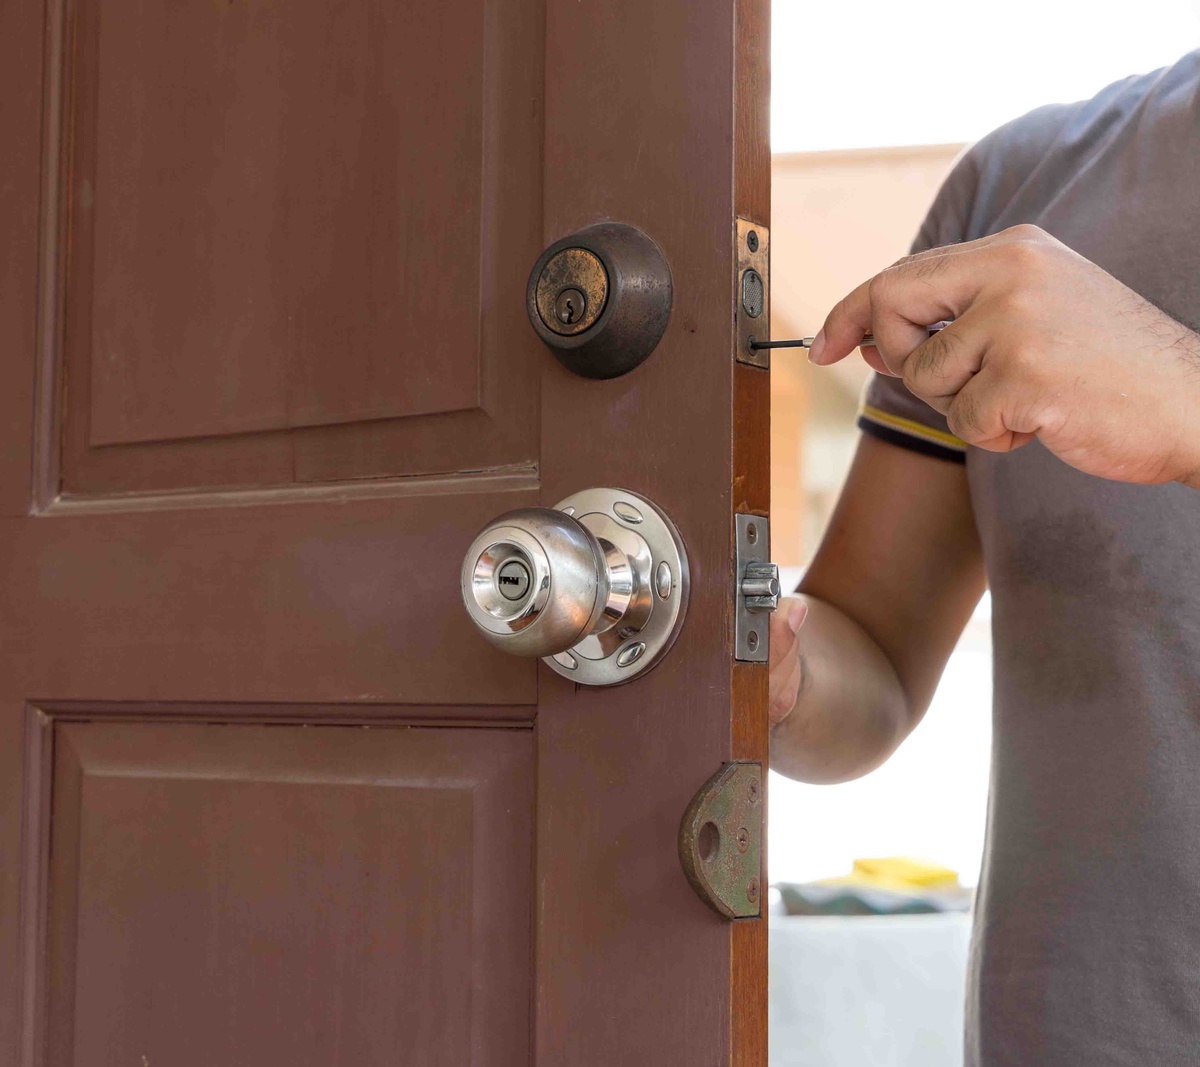 Secure Solutions Brighton: Your 24-Hour Locksmith Partner